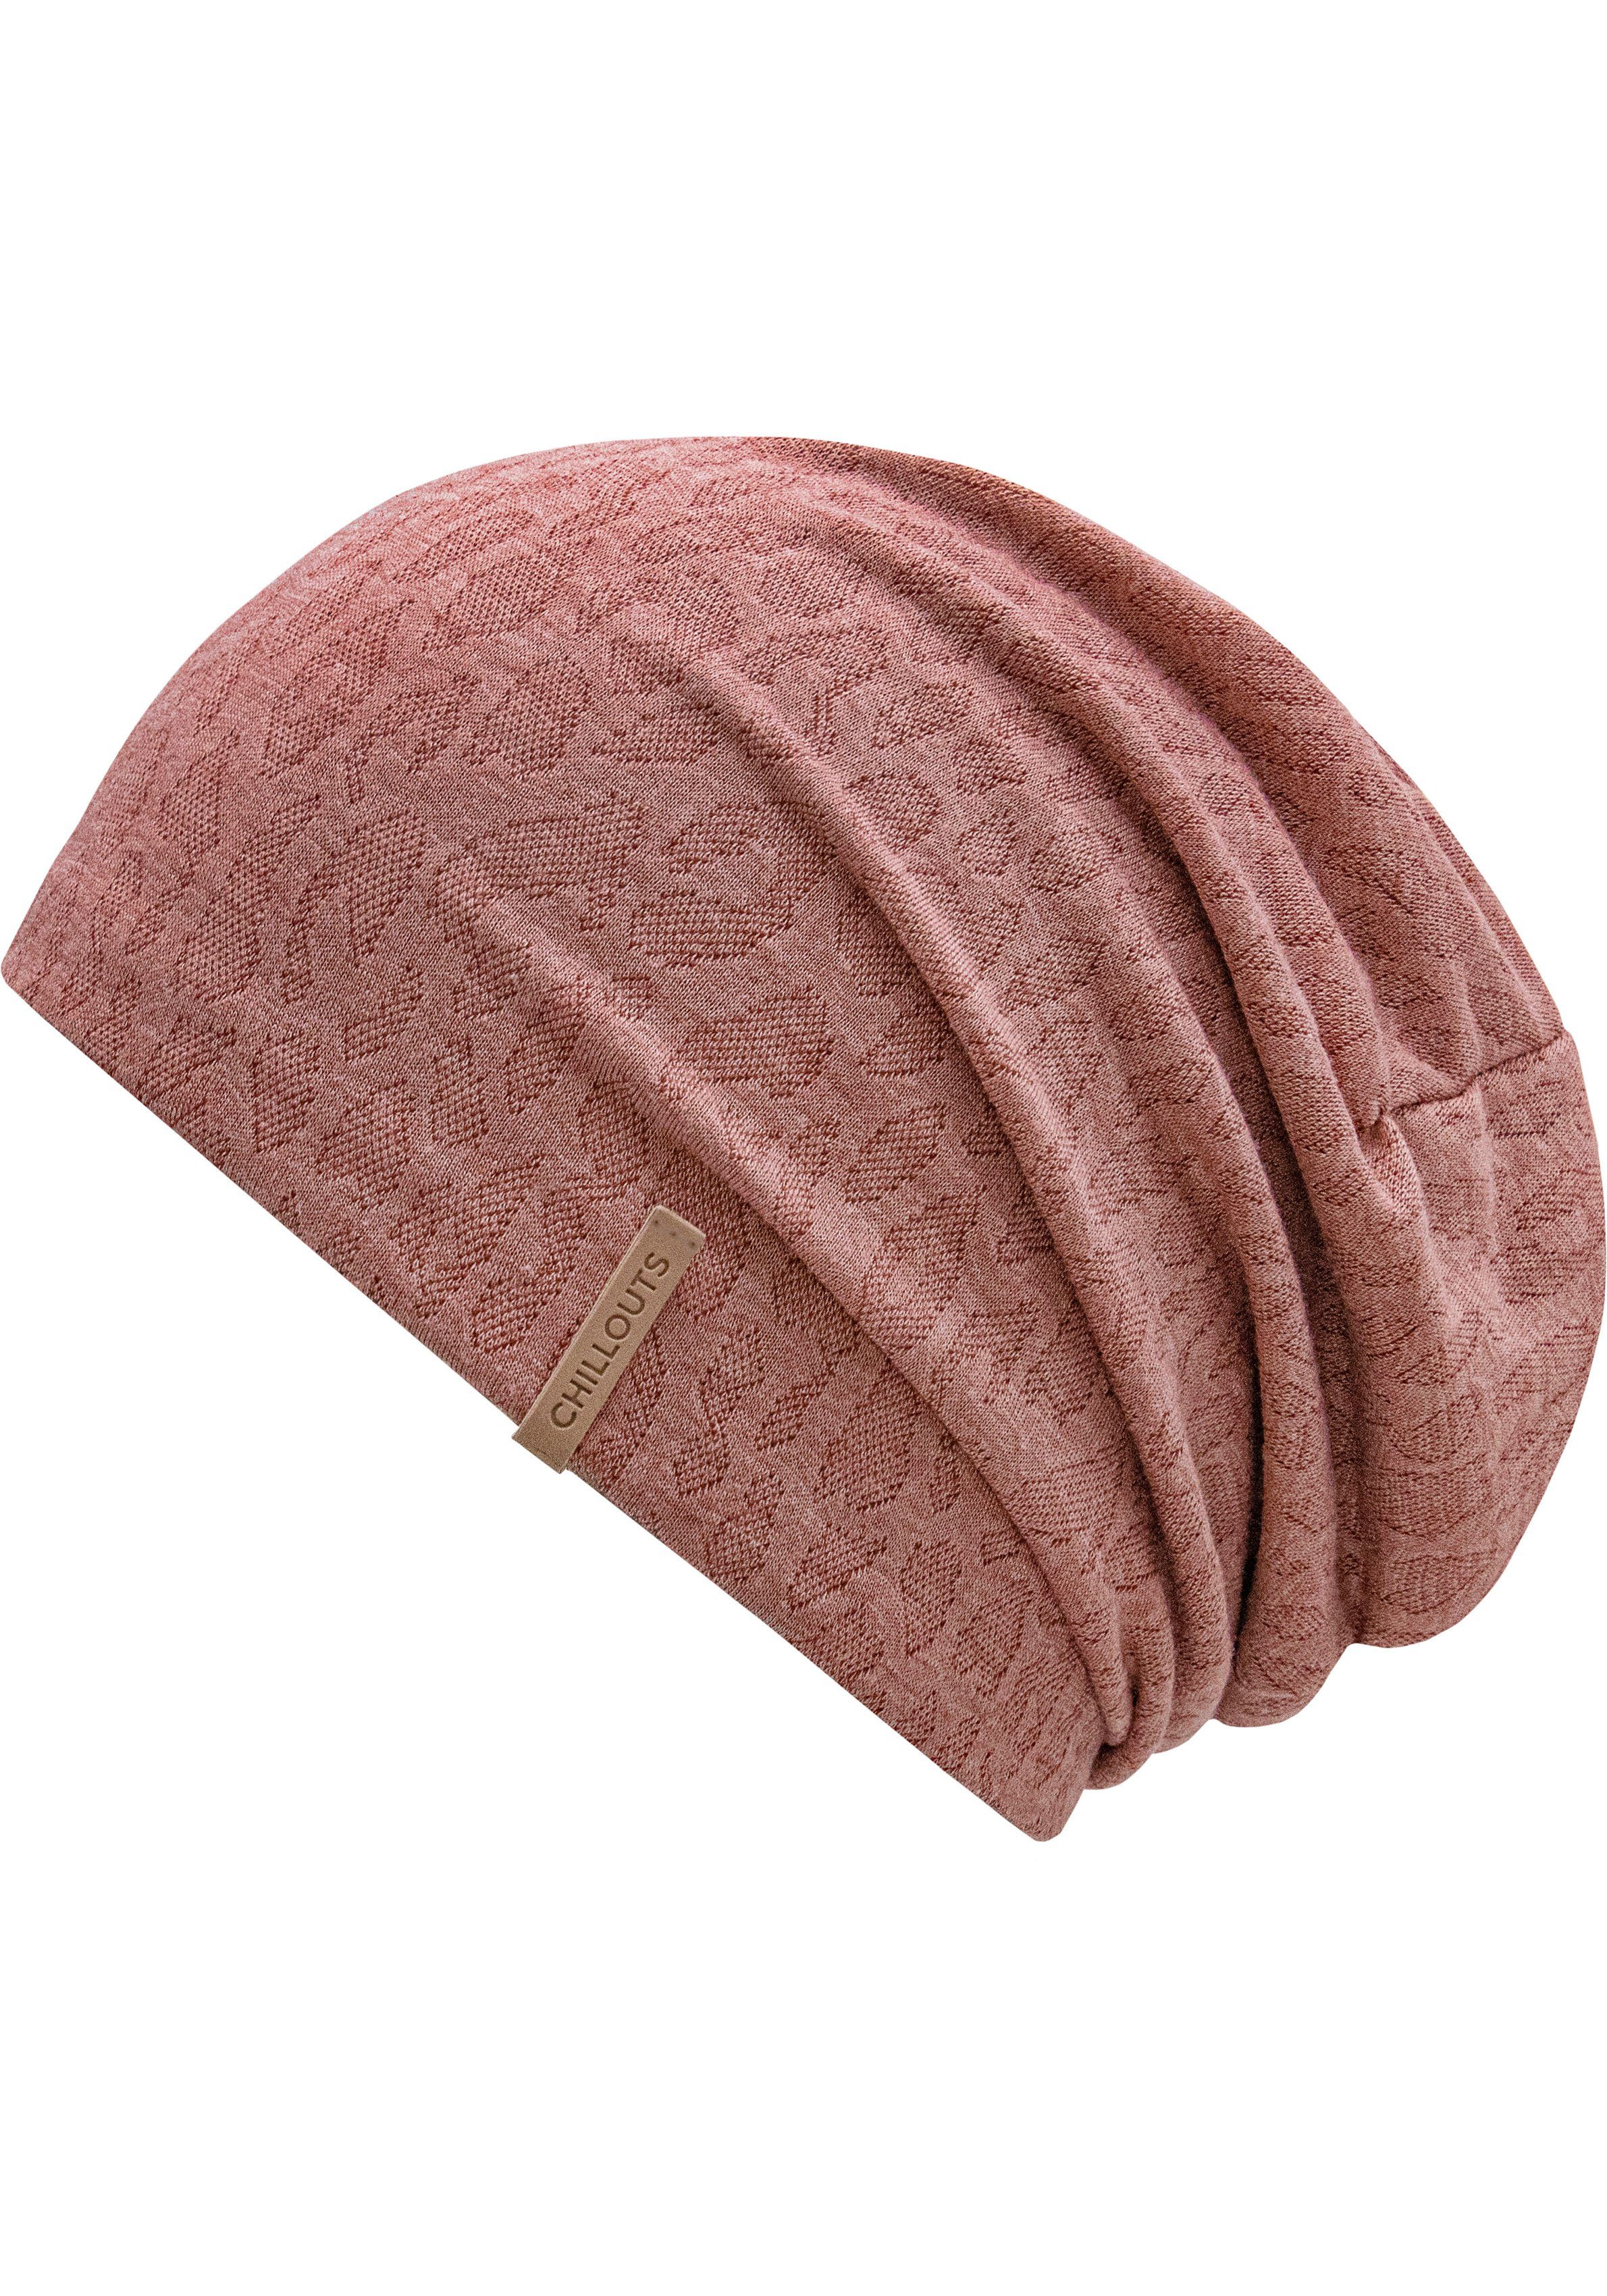 chillouts Beanie Hat terracotta Rochester